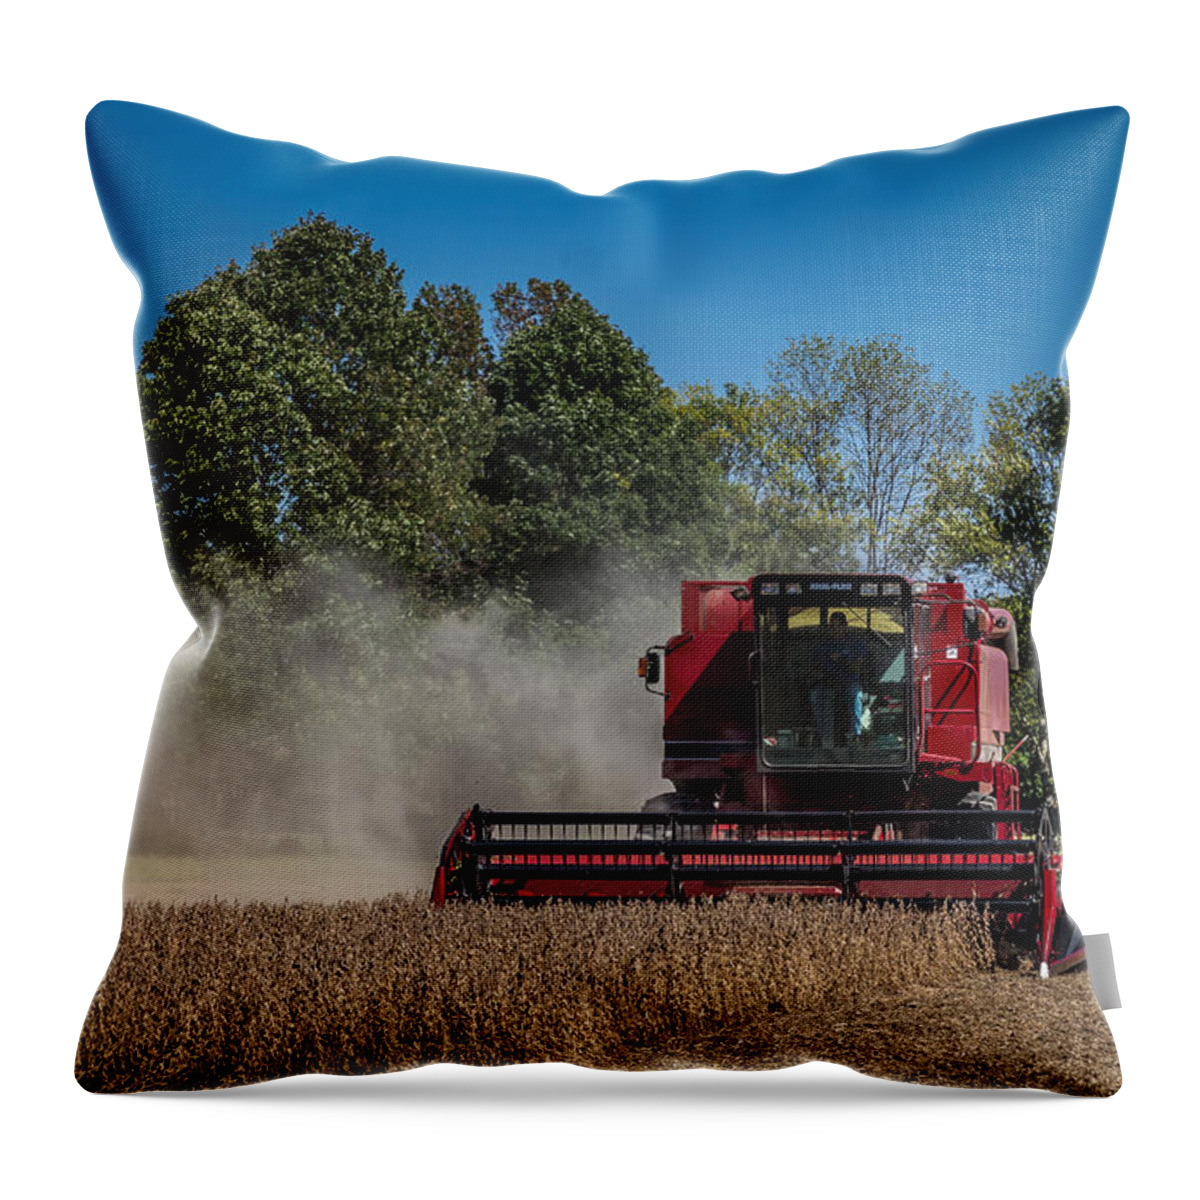 Axial Flow Throw Pillow featuring the photograph Case IH Bean Harvest by Ron Pate